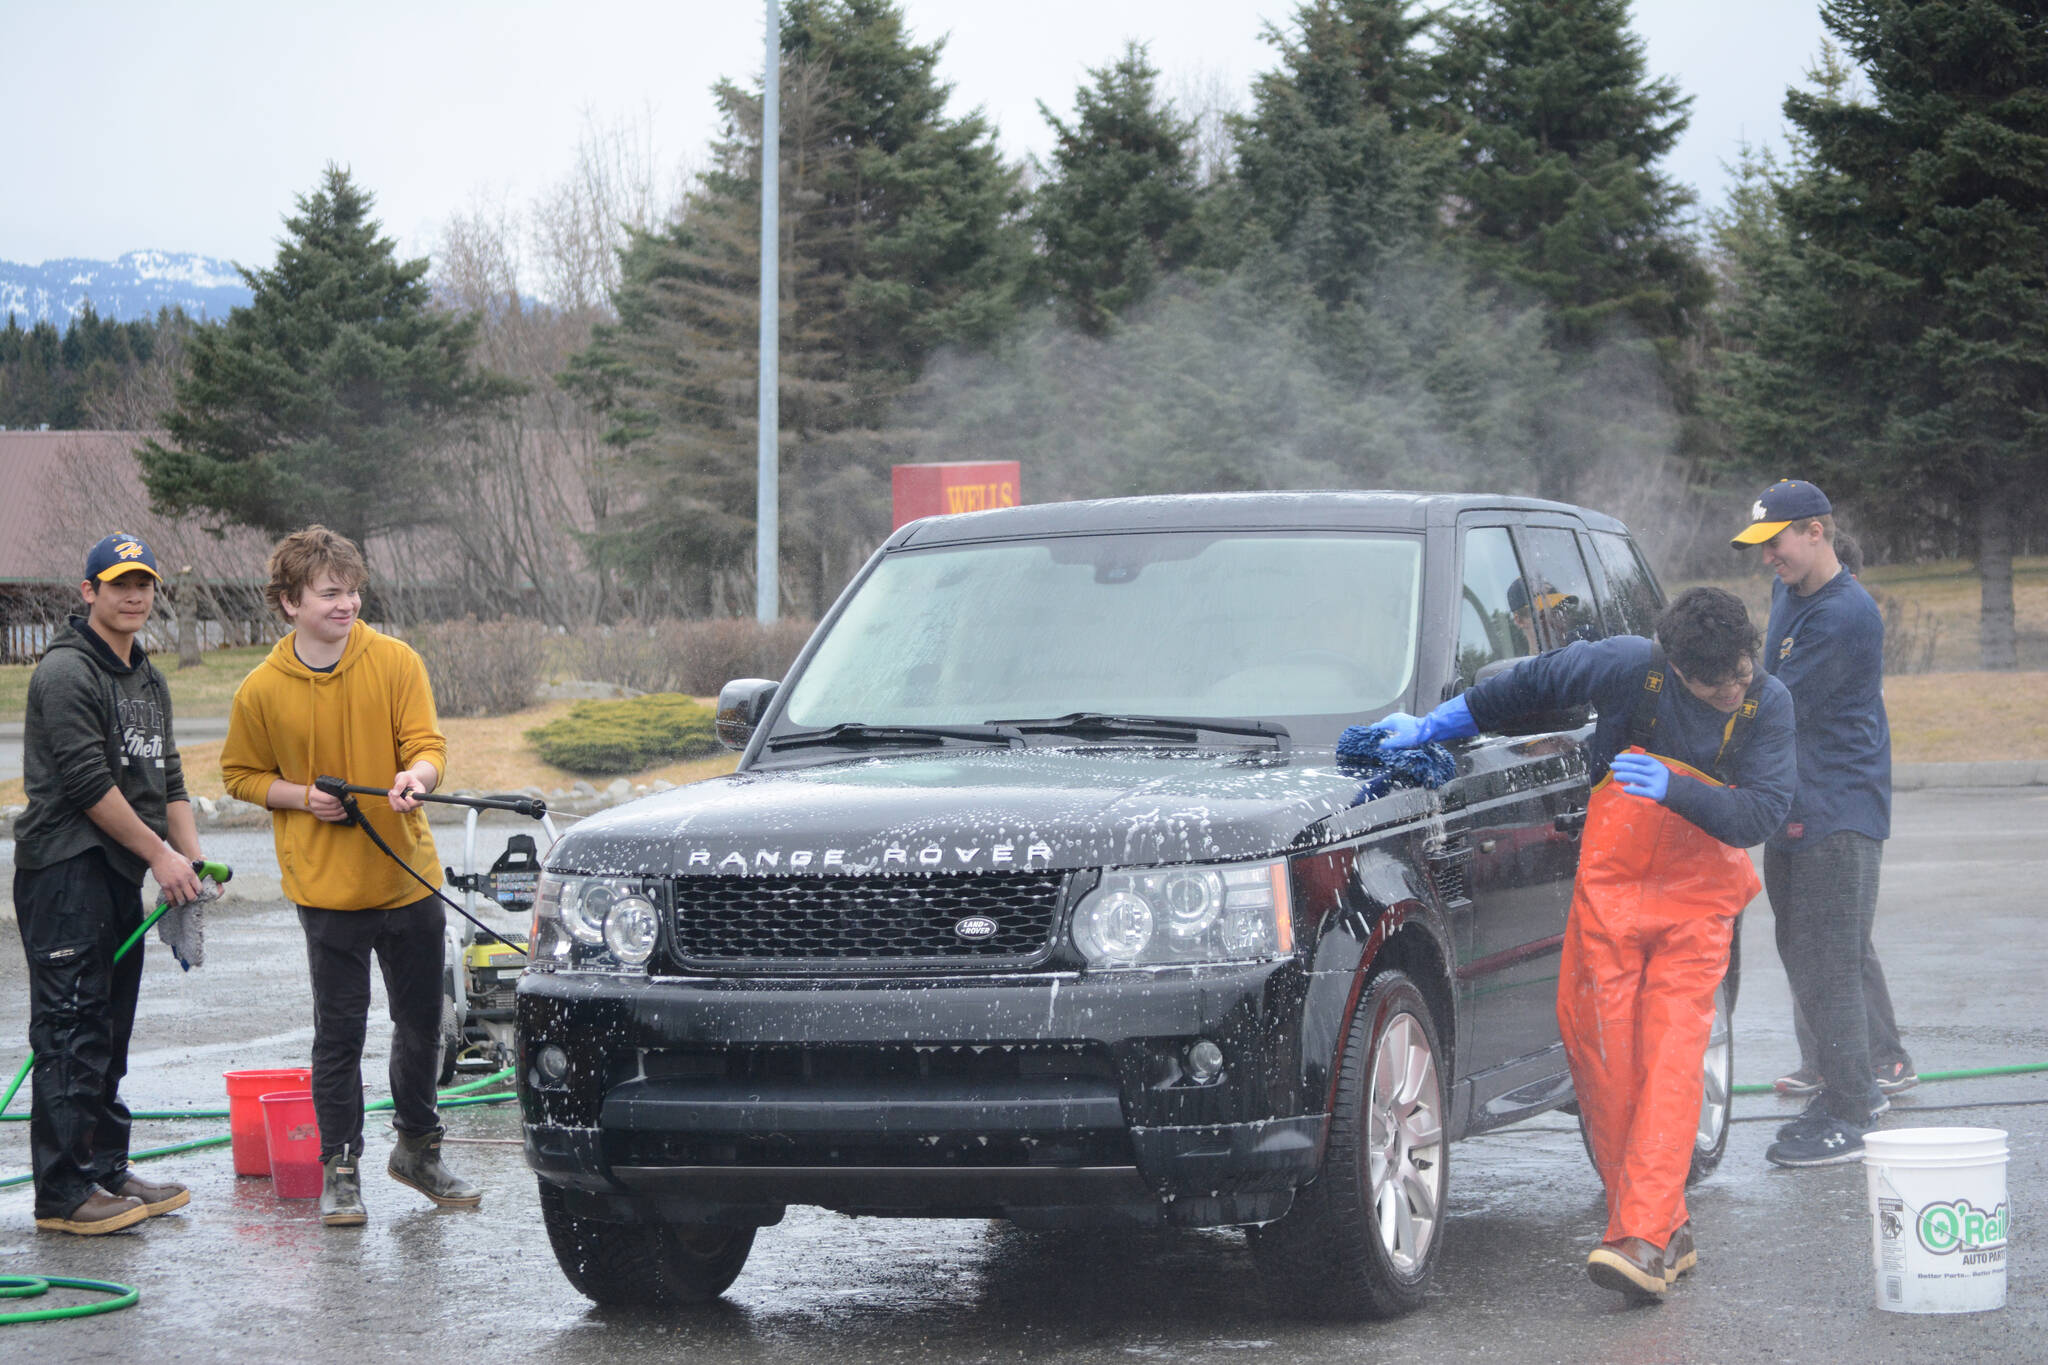 Members of the Homer Mariner baseball team wash cars for a fundraiser on Saturday, April 23, 2022, at Wells Fargo in Homer, Alaska. The Mariners play Friday vs. Redington High School in Wasila and Saturday vs. Barlett and Service in Anchorage. (Photo by Michael Armstrong/Homer News)